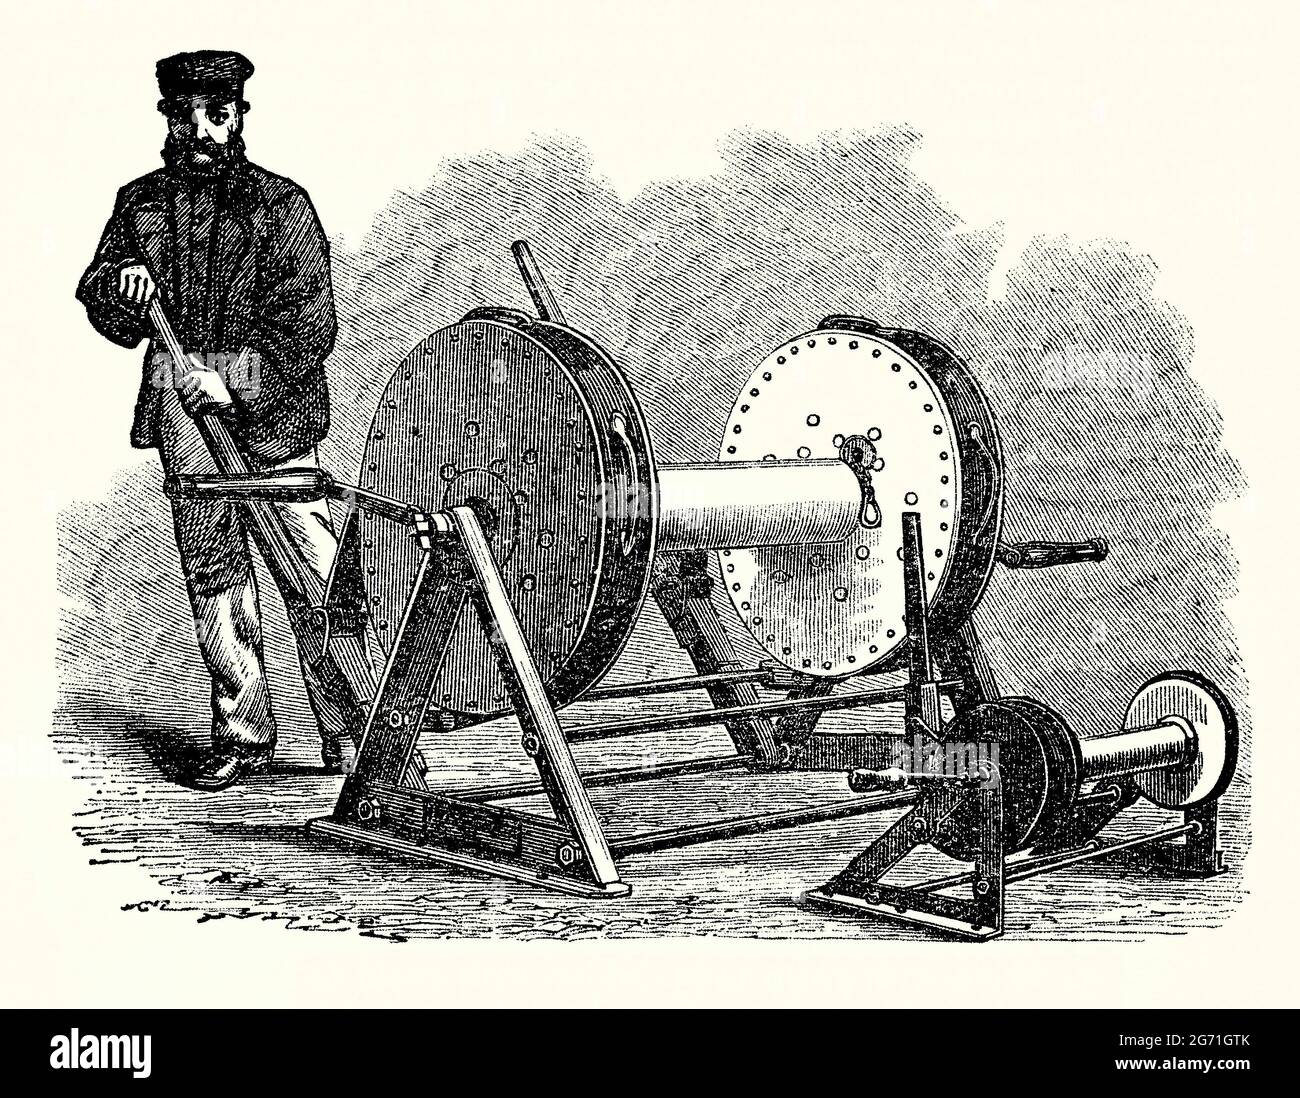 An old engraving of a Harvey’s Torpedo control winch. It is from a Victorian book of the 1890s on discoveries and inventions during the 1800s. It was invented Britain in the late 1860s by Frederick Harvey and John Harvey. The torpedo or mine was an improvement on existing designs where it was suspended on a spar over the bow of the ship. The Harvey torpedo involved an explosive charge attached to a line that, using buoys and winches, was projected away from the boat carrying it, making it less dangerous to detonate. Here an operator controls a winch used to pay out the tow-rope to the mine. Stock Photo